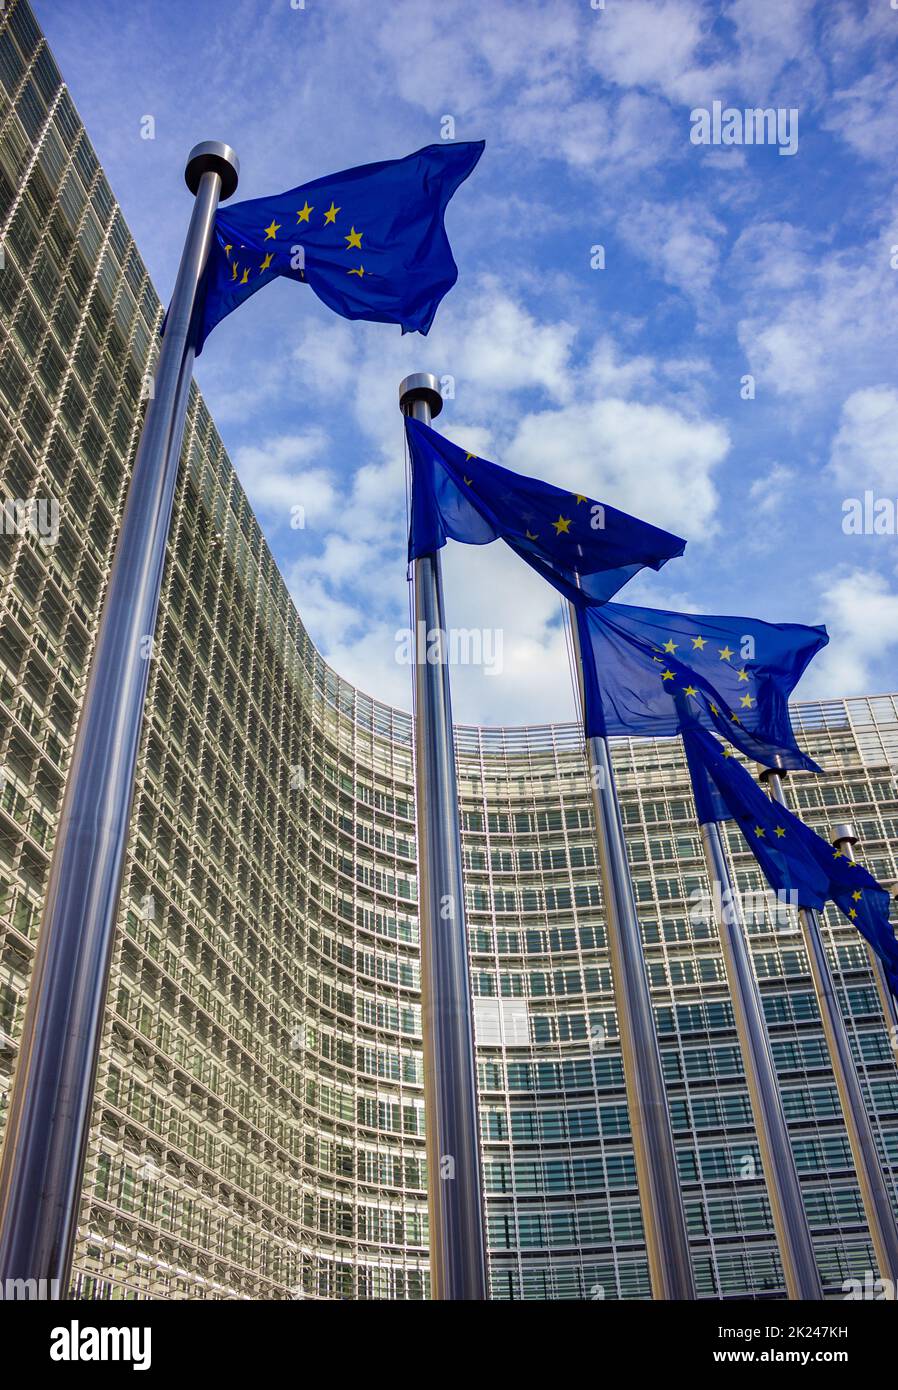 A picture of the Le Berlaymont building overlooking some European Union flags. Stock Photo